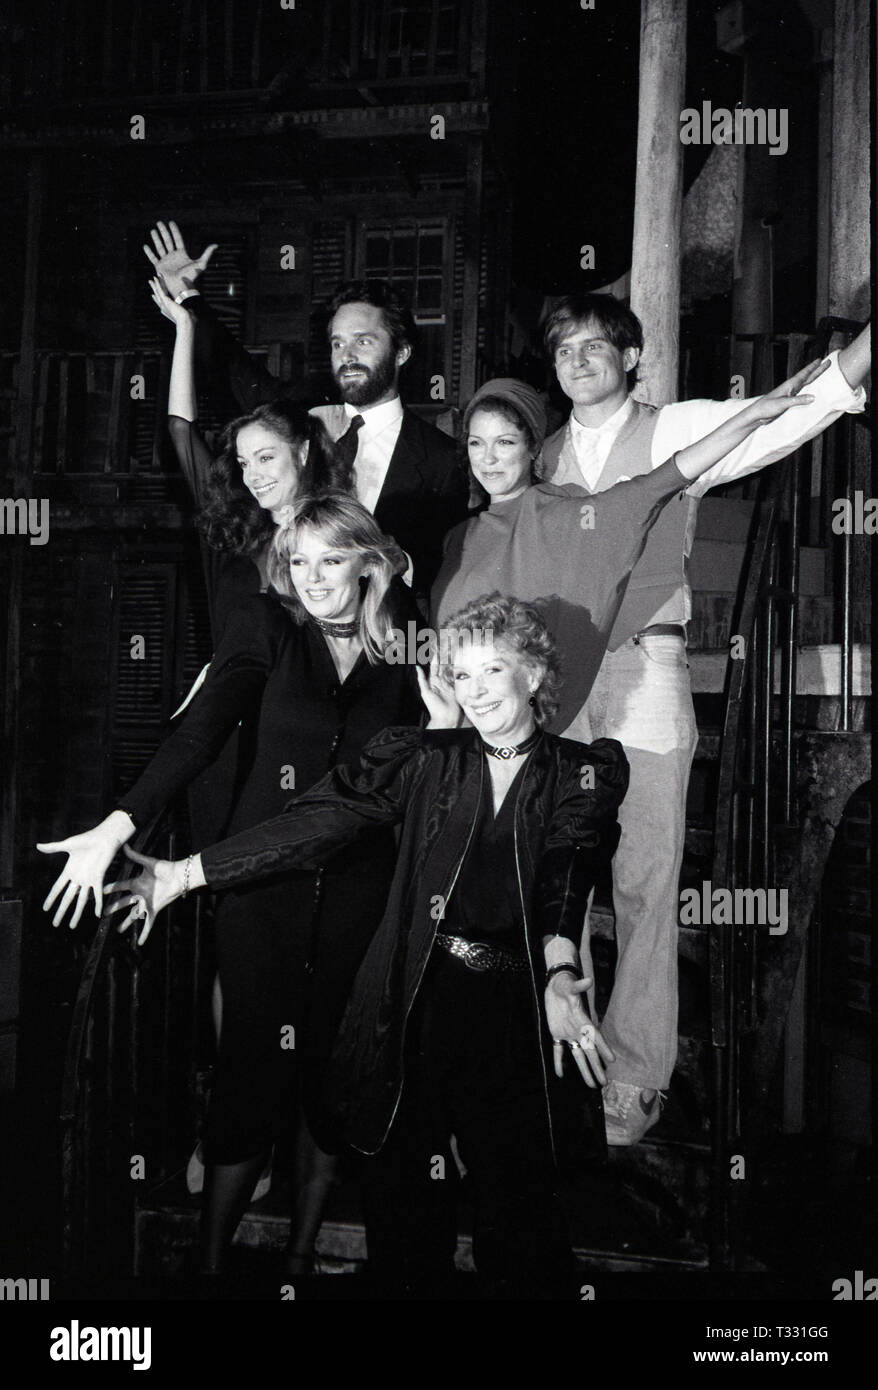 Gregory Harrison, David Marshall Grant, Shanna Reed, Deborah Geffner, Sheree North with Gwen Verdon making her Television debut in 'Legs' an American made-for-television musical drama film at Radio City Music Hall on 9/03/1983 in New York City. Credit: Walter Mcbride / MediaPunch Stock Photo